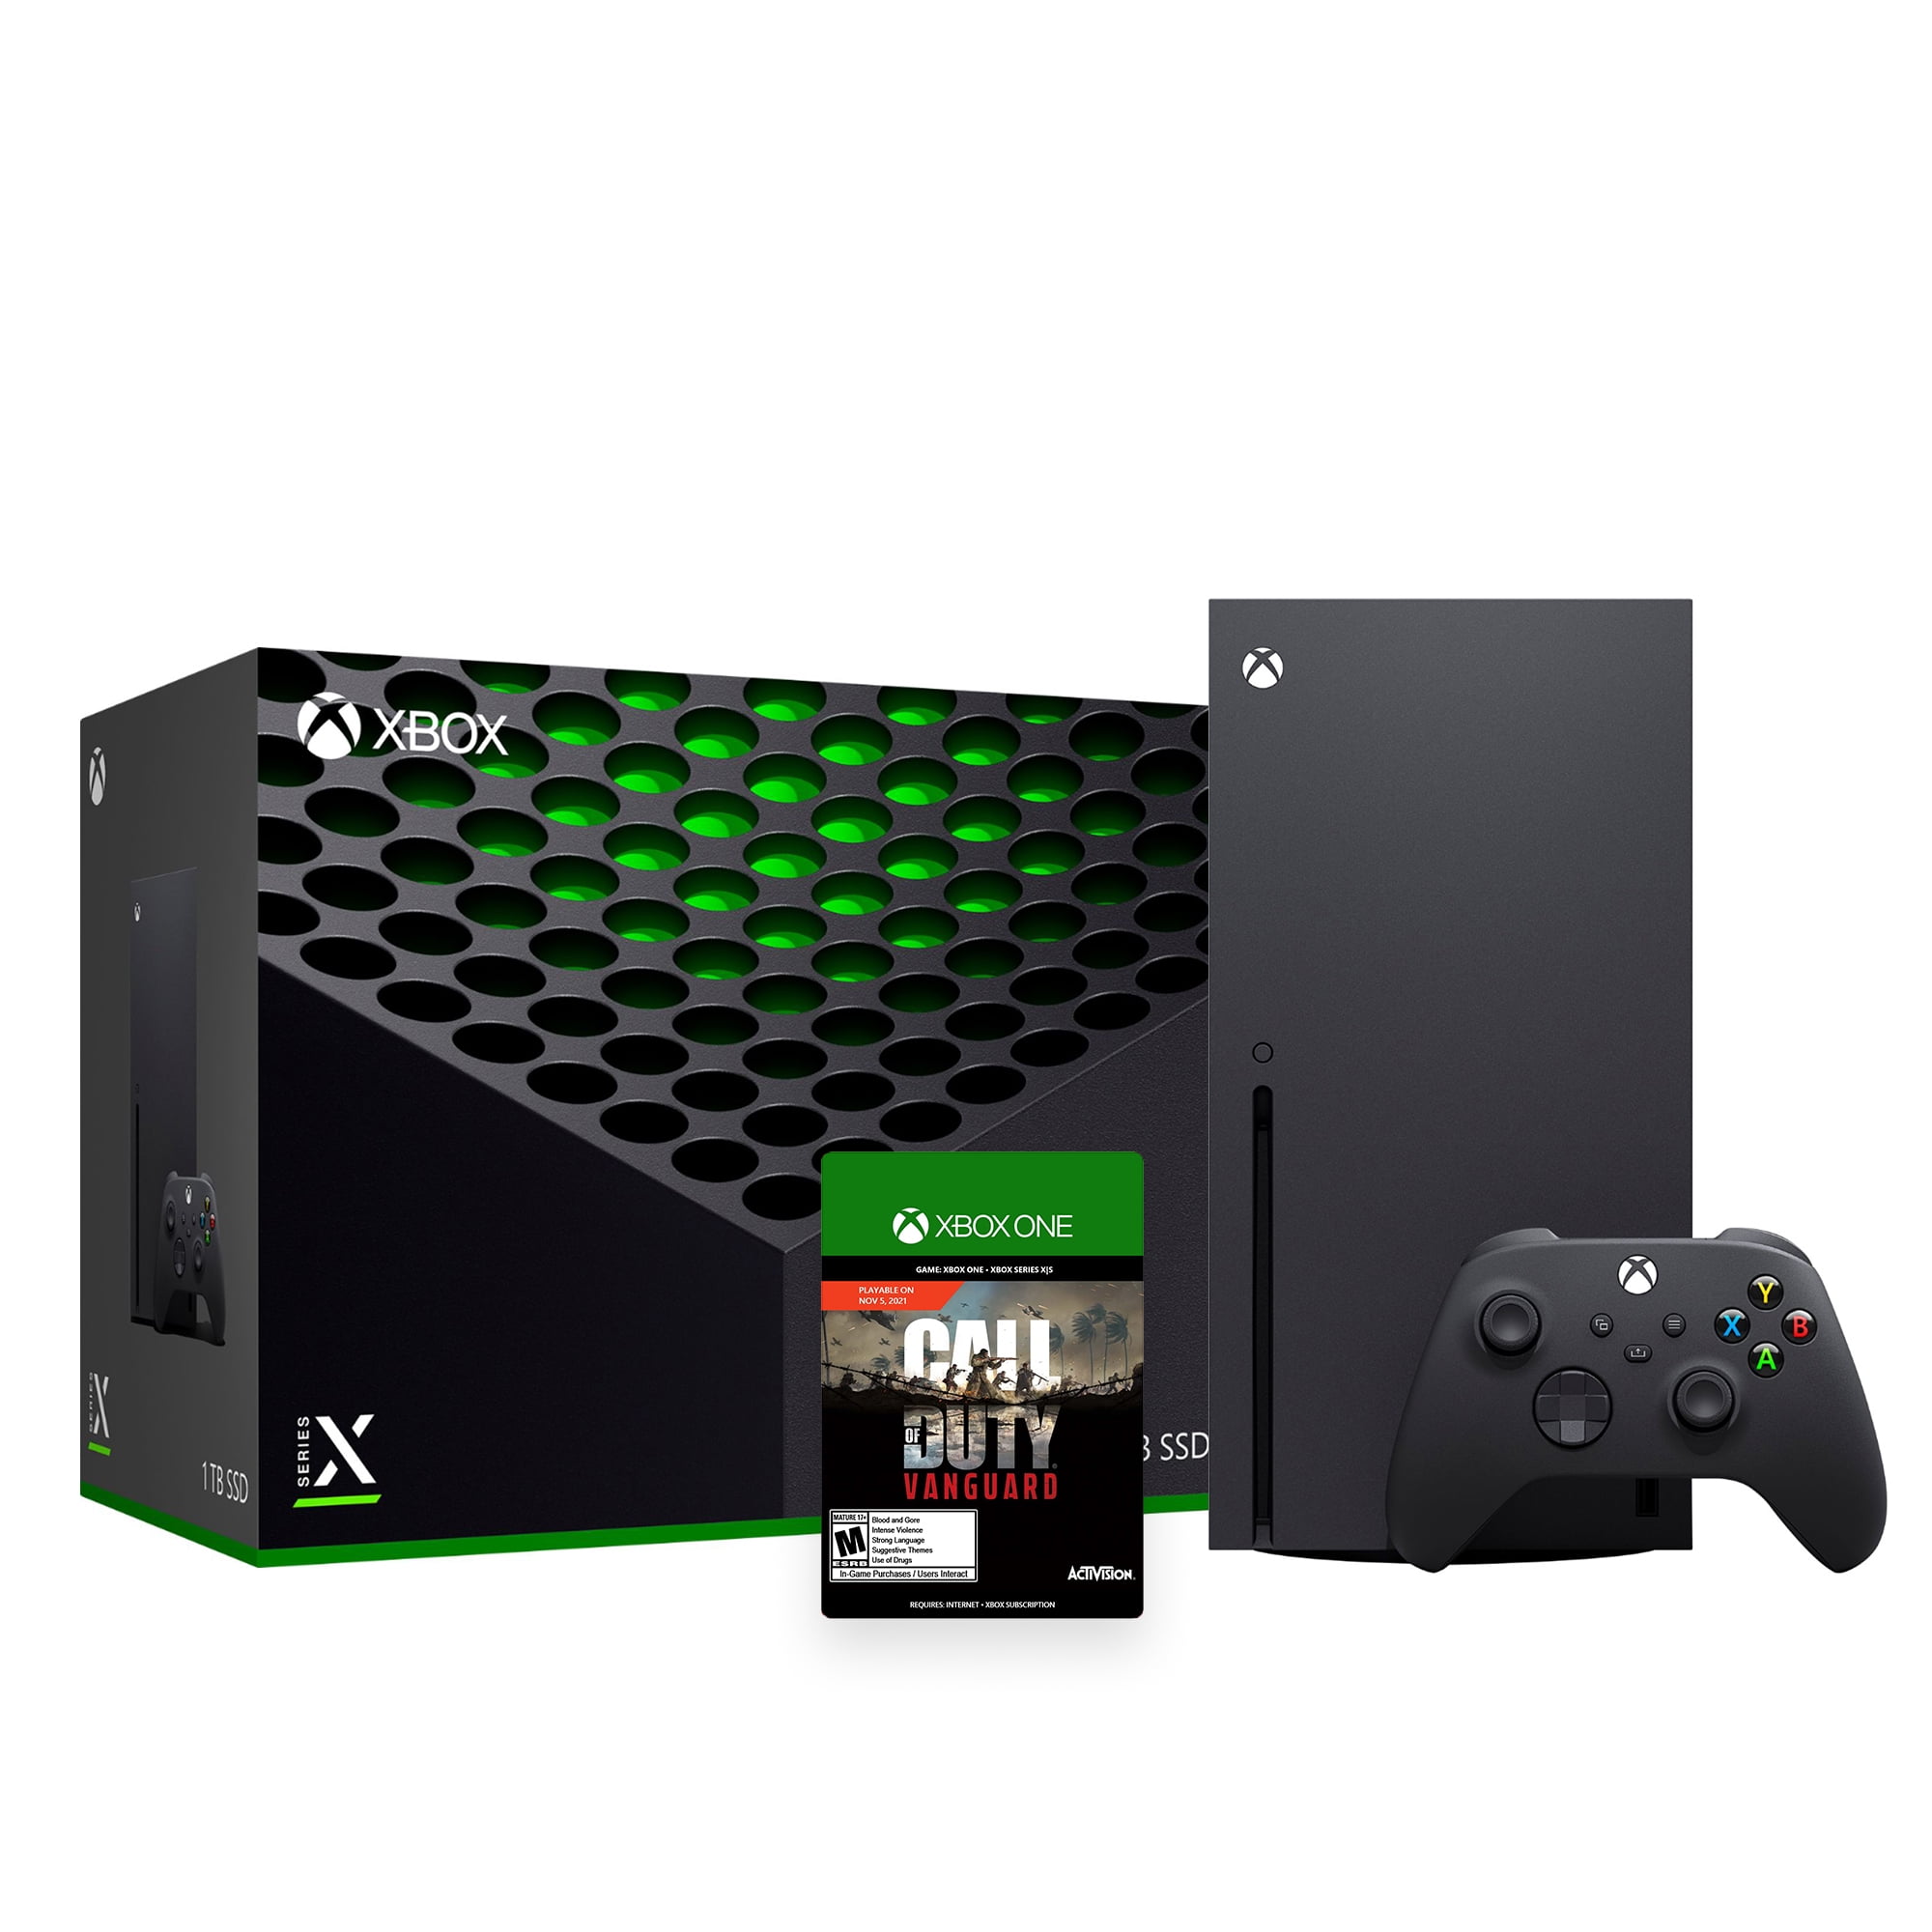 Microsoft Xbox Series X 1 TB Video Game Console FAST SHIPPING